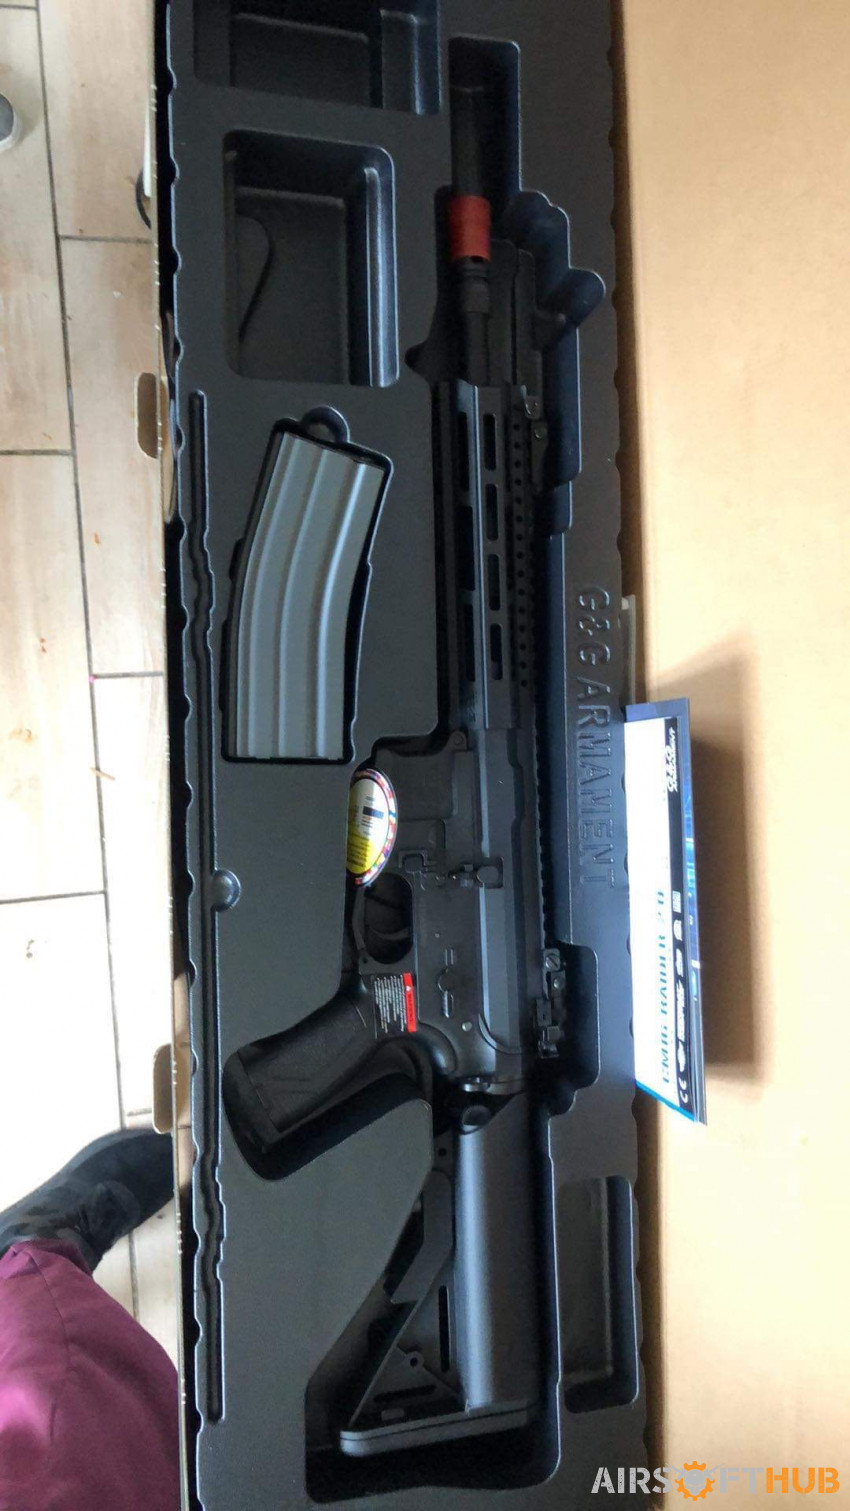 For sale brand new G&g raider - Used airsoft equipment